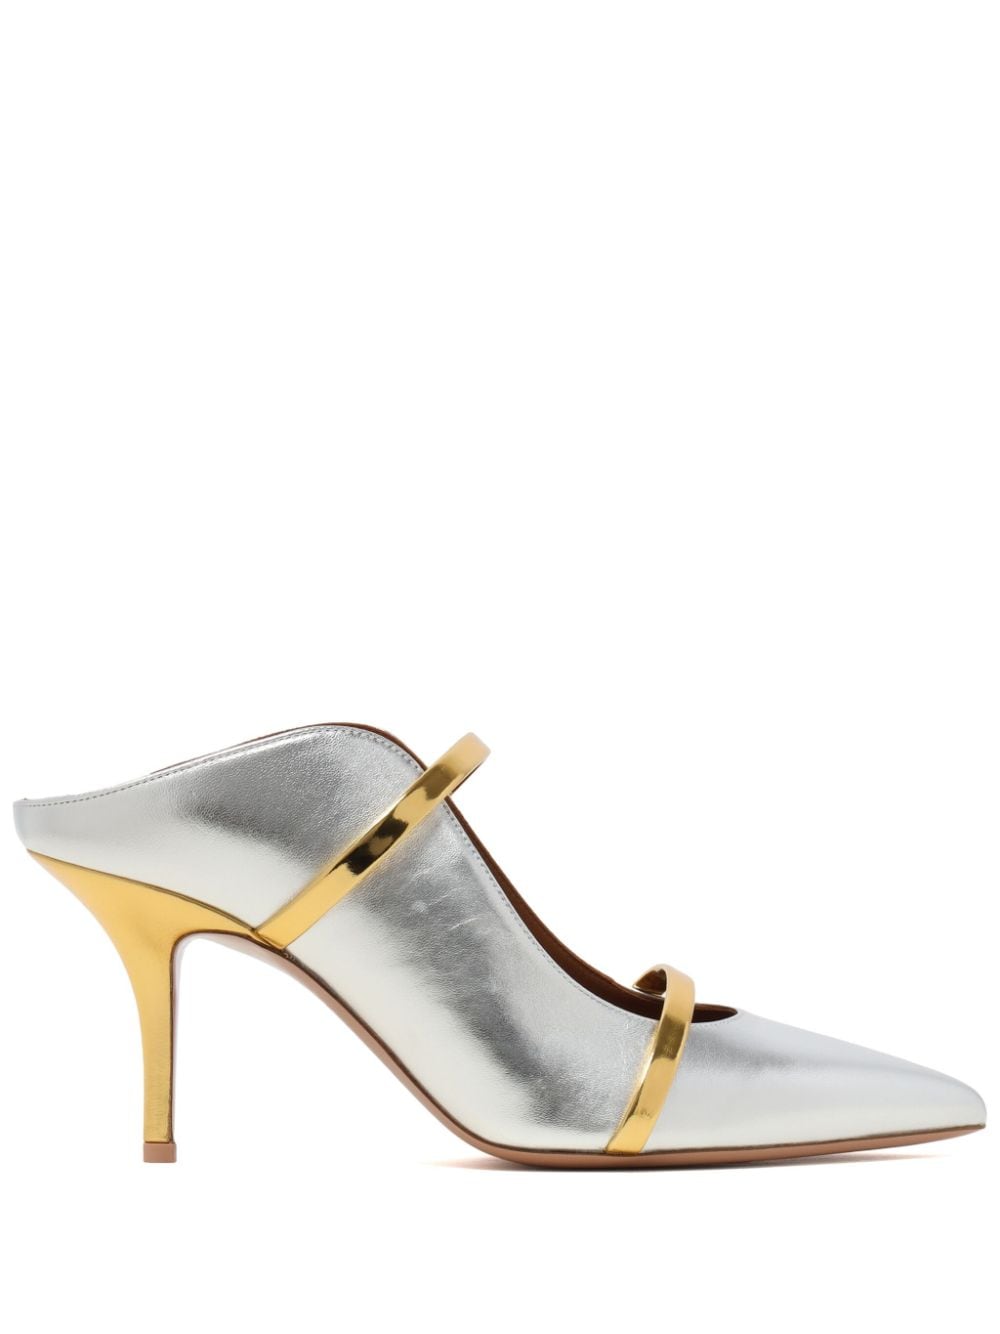 Malone Souliers 'Maureen' Mules - Silber von Malone Souliers